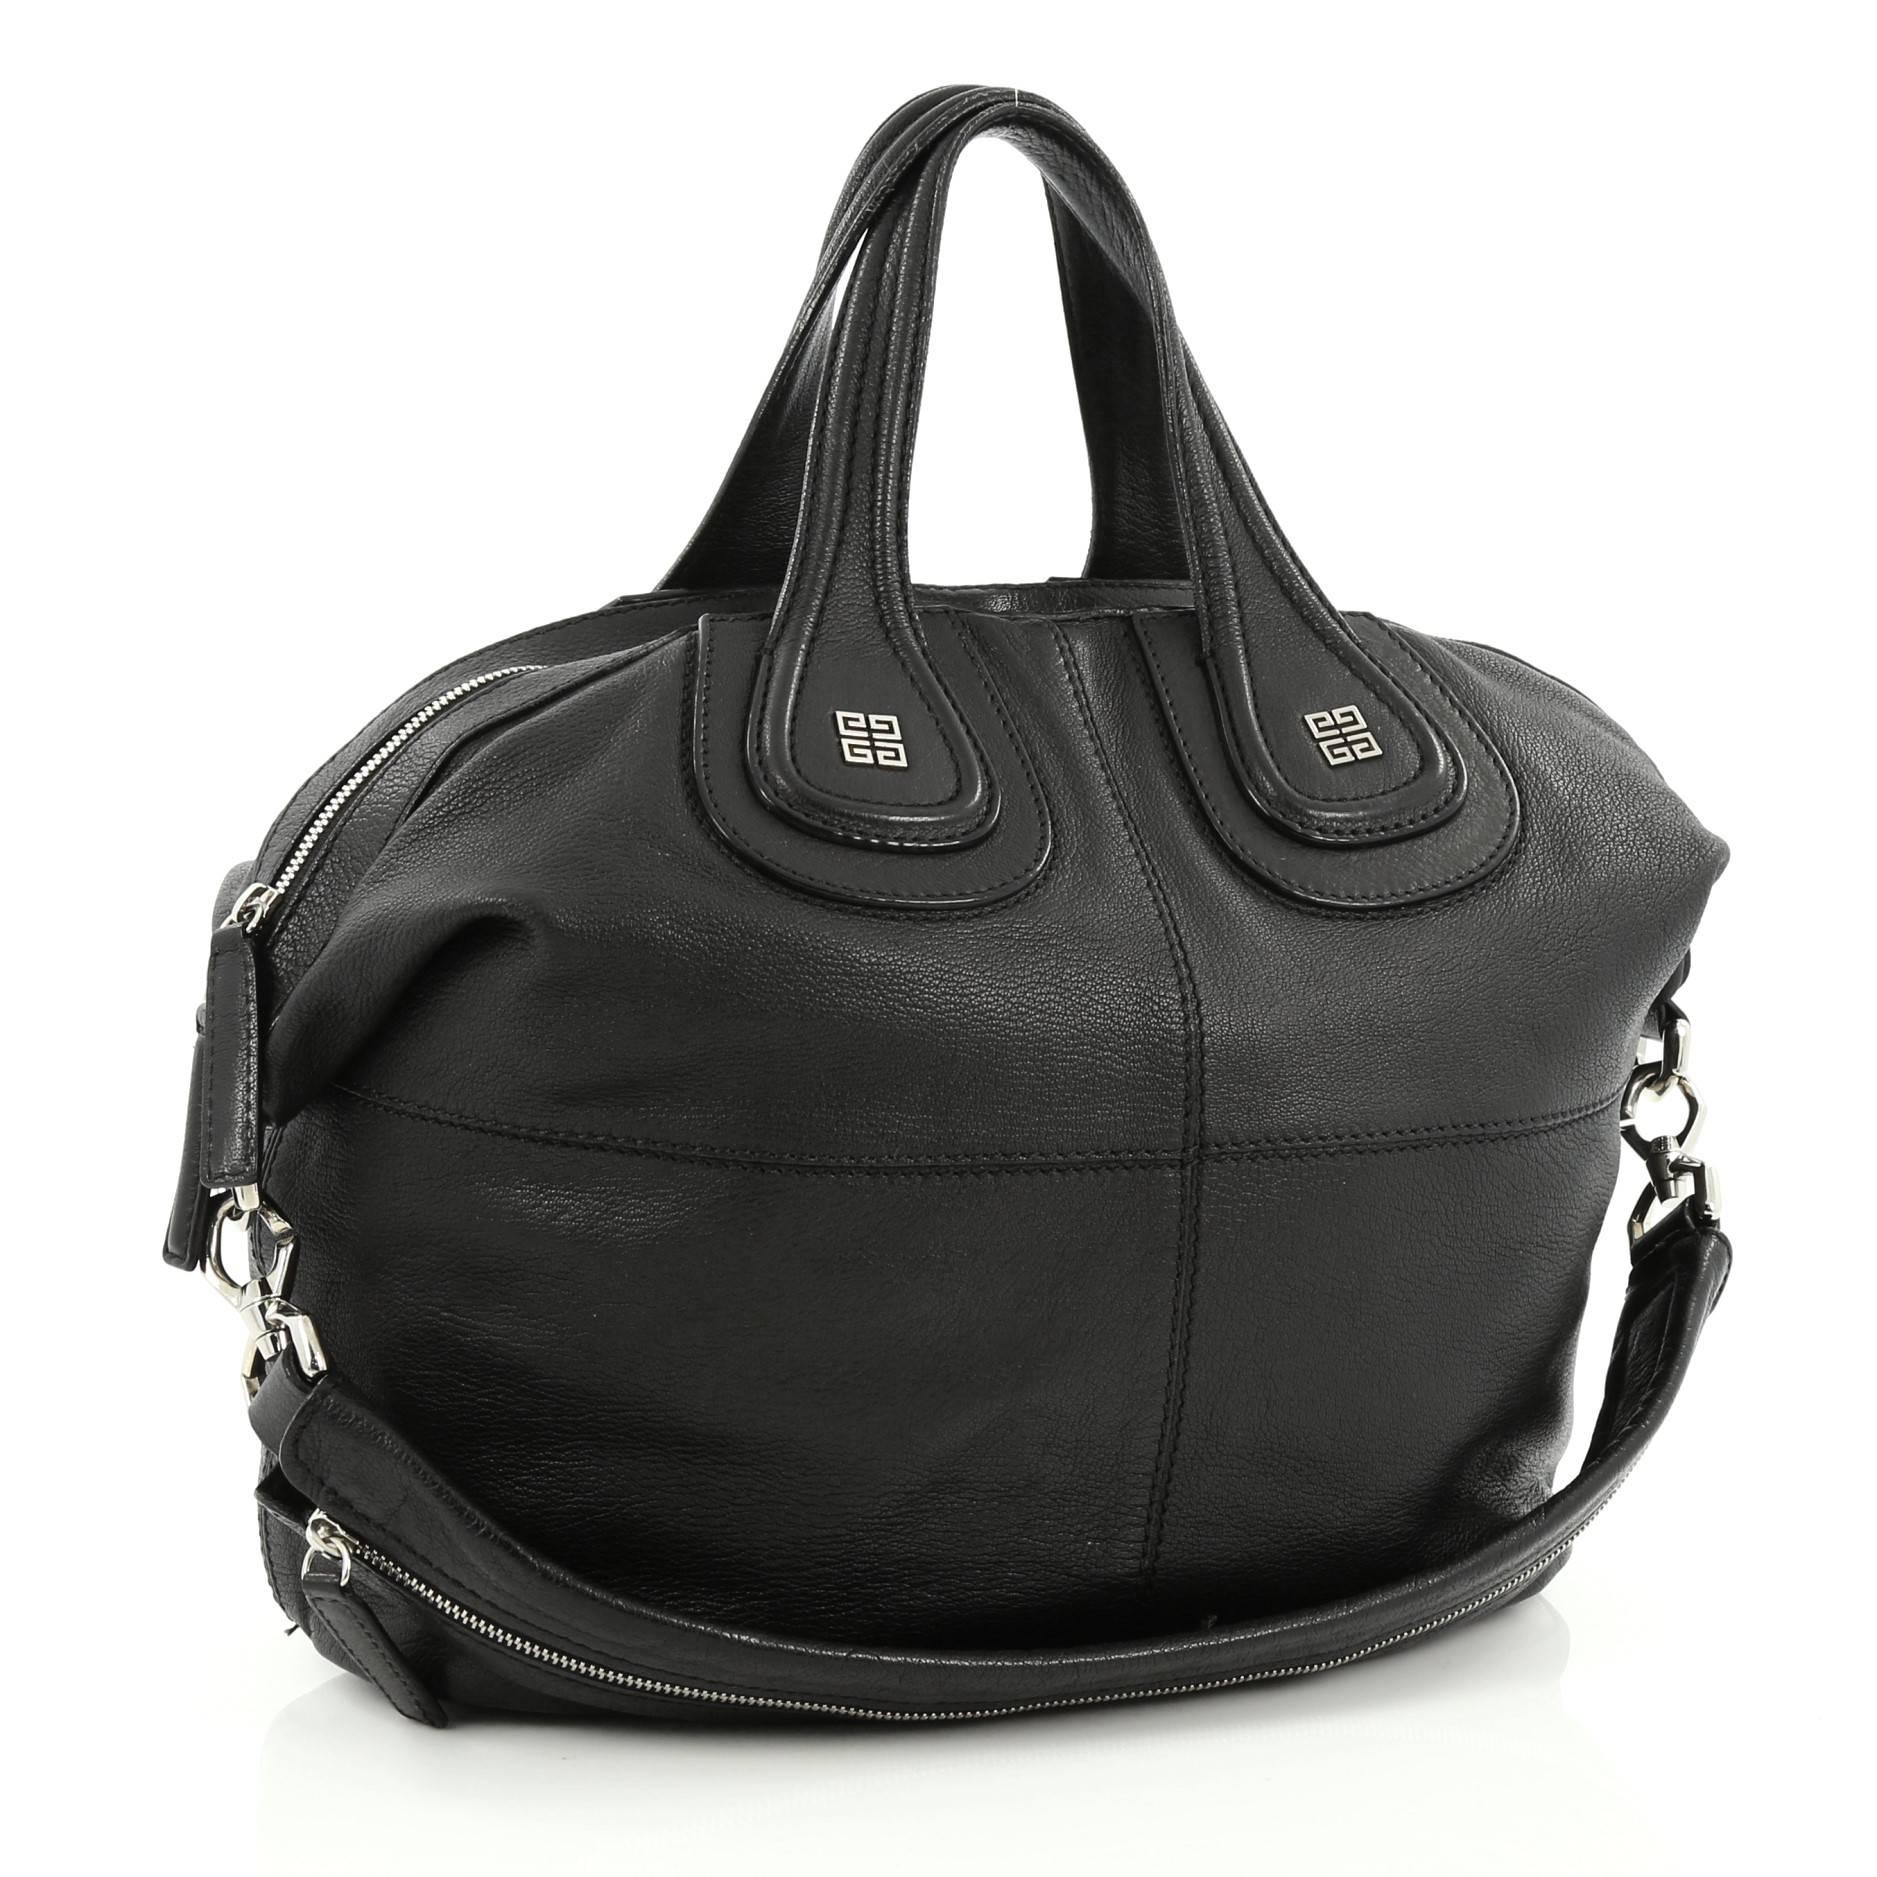 Black Givenchy Nightingale Satchel Leather Small